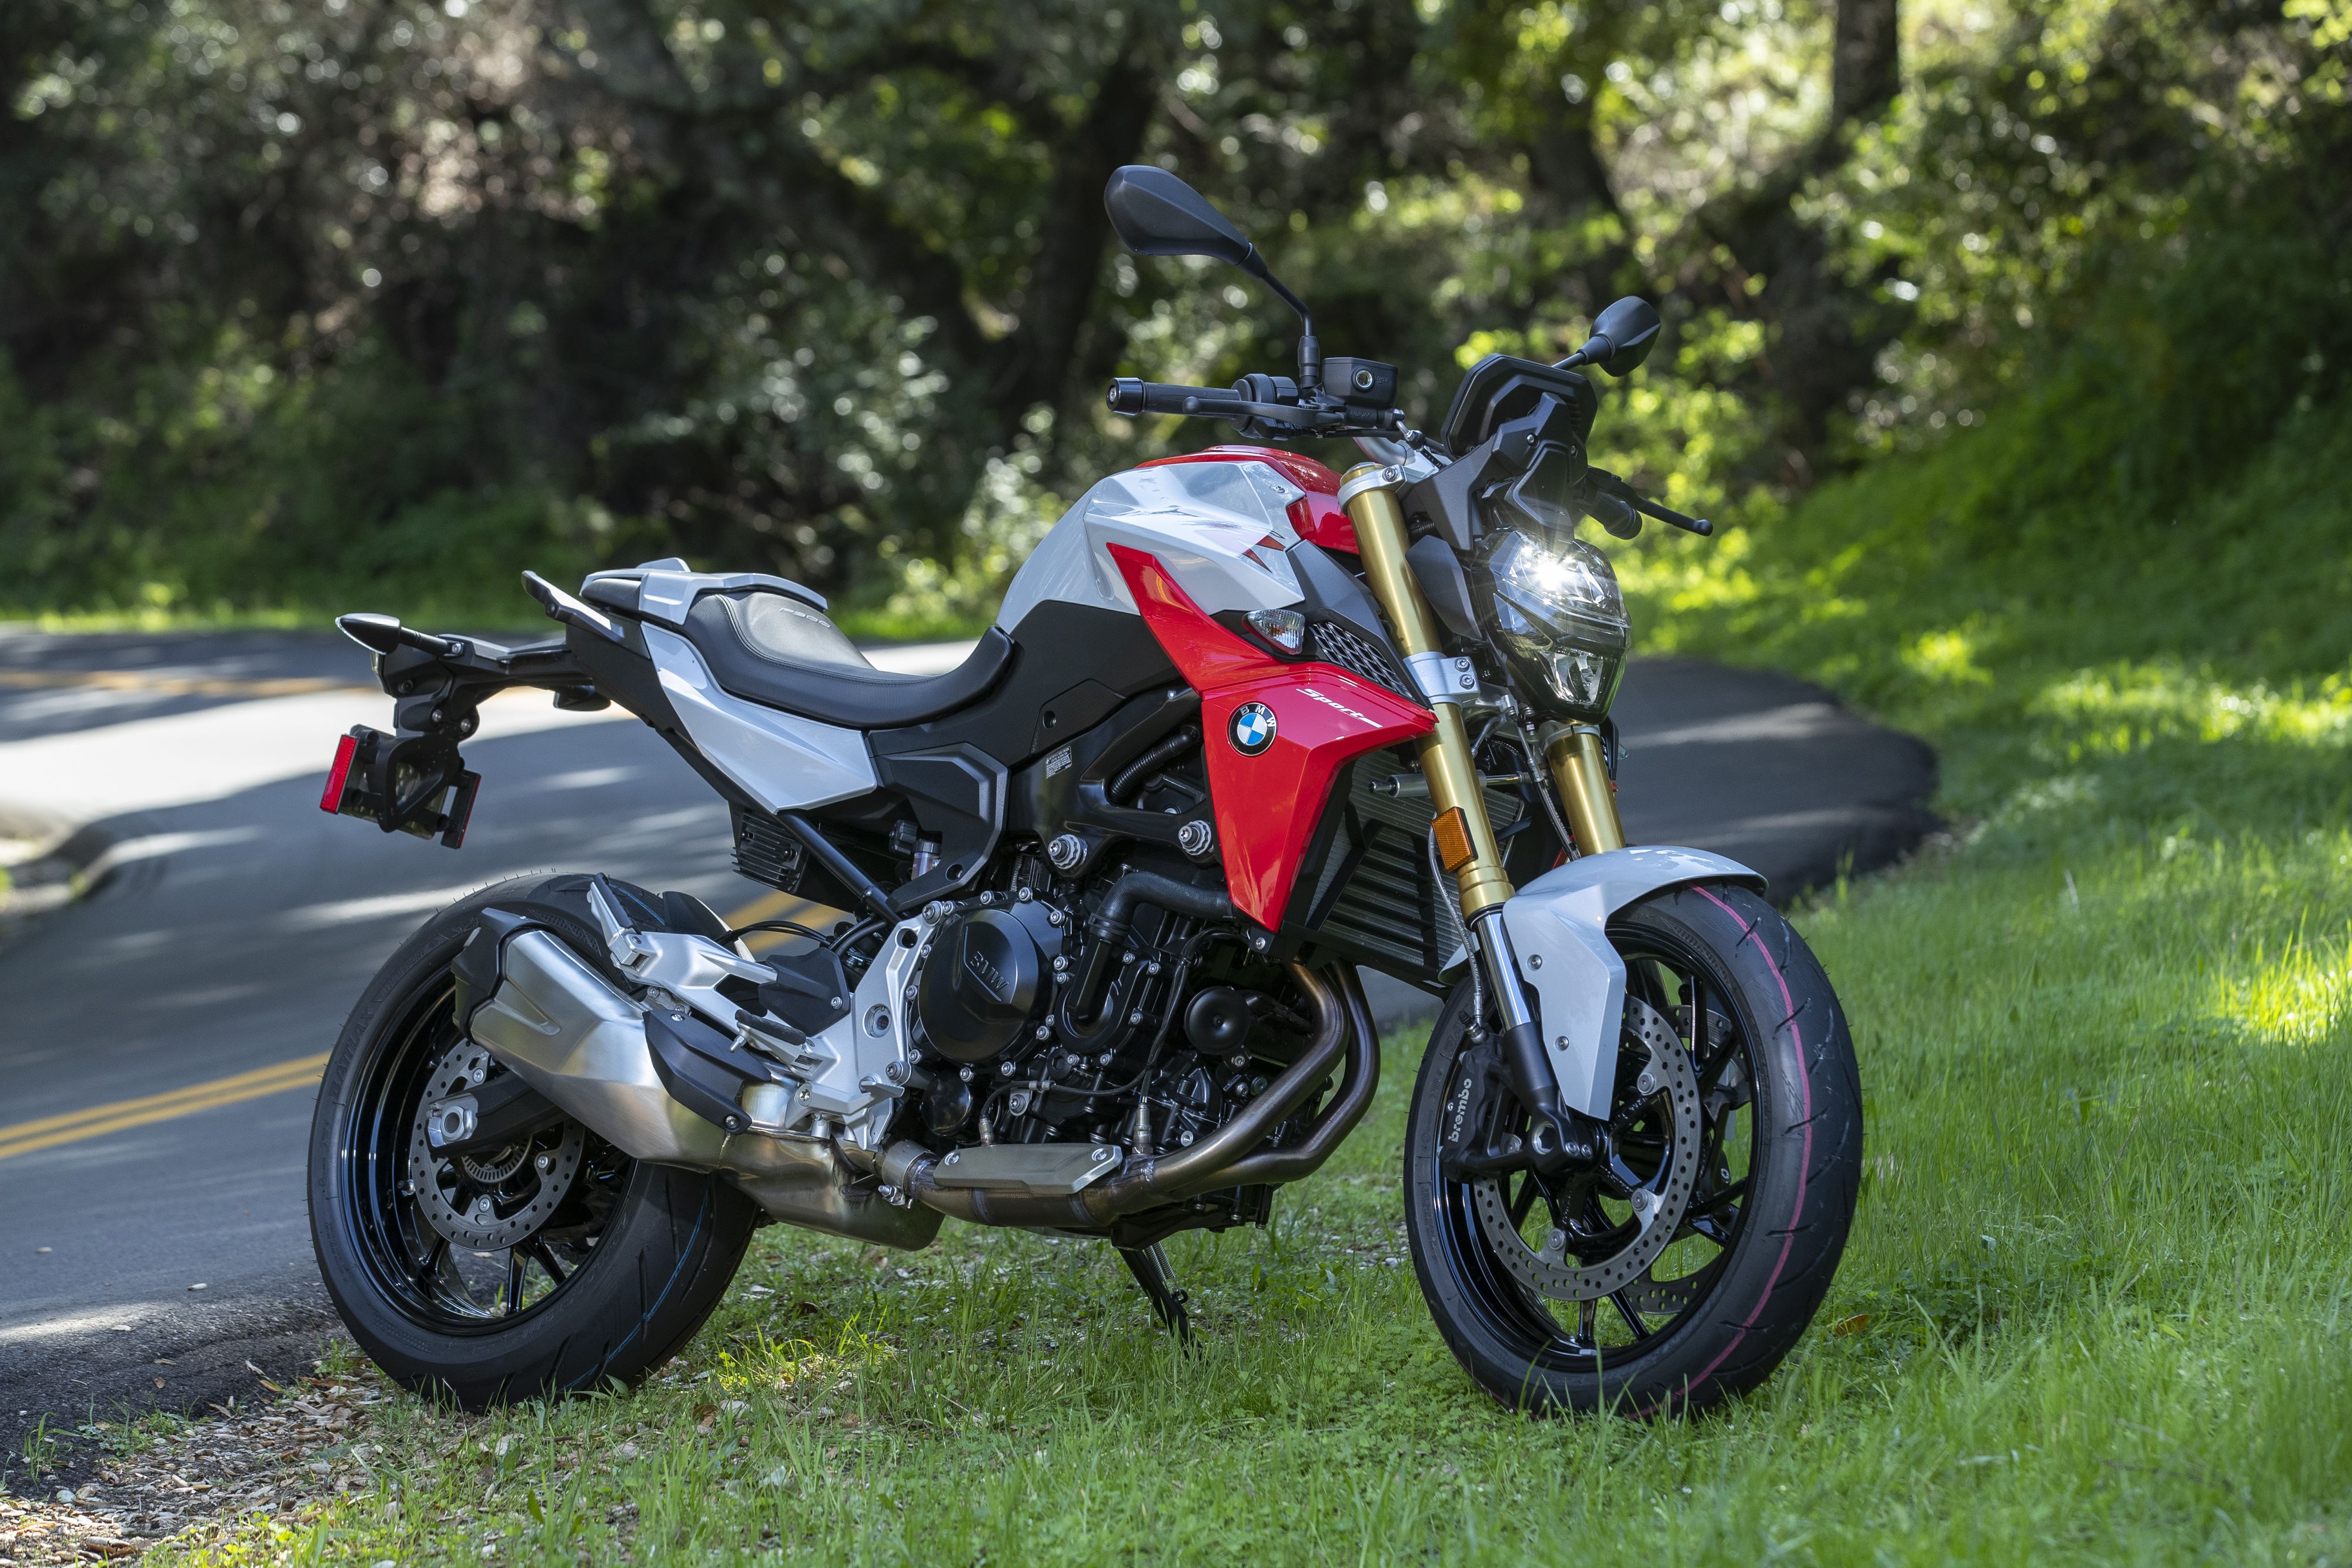 NEW MOTORCYCLE: BMW「F900R」 in New Colors & with New Electronic Controls